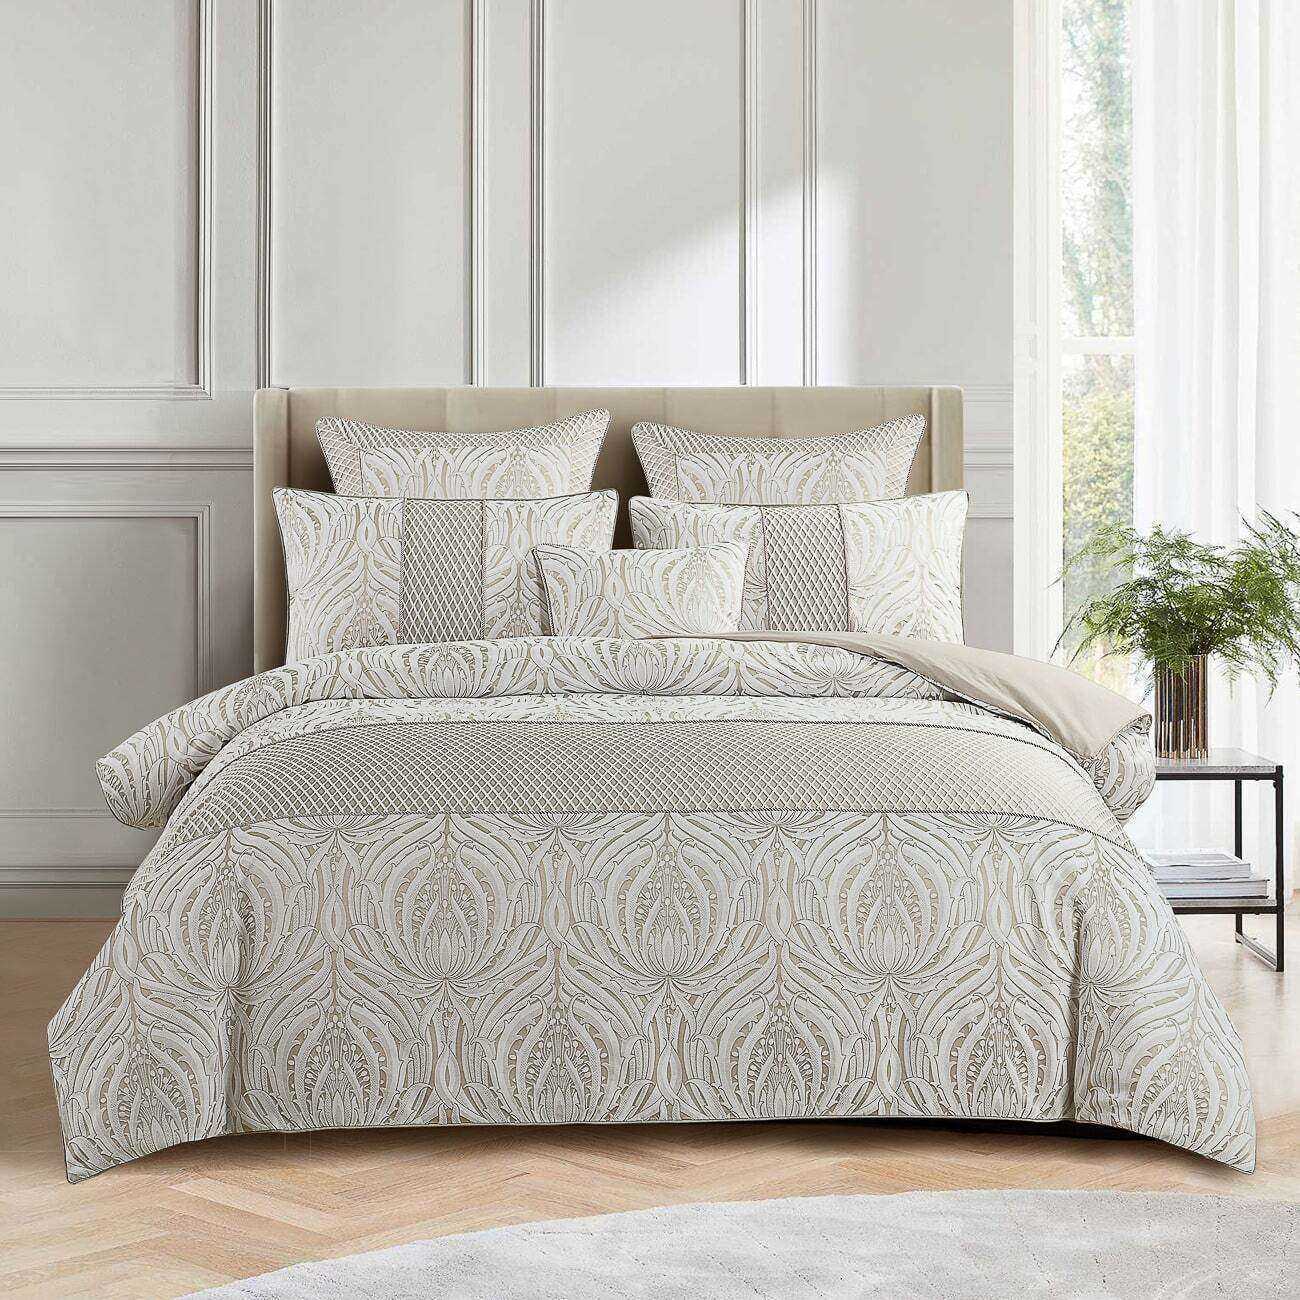 Amara Quilt Cover Set [SIZE: King Bed]